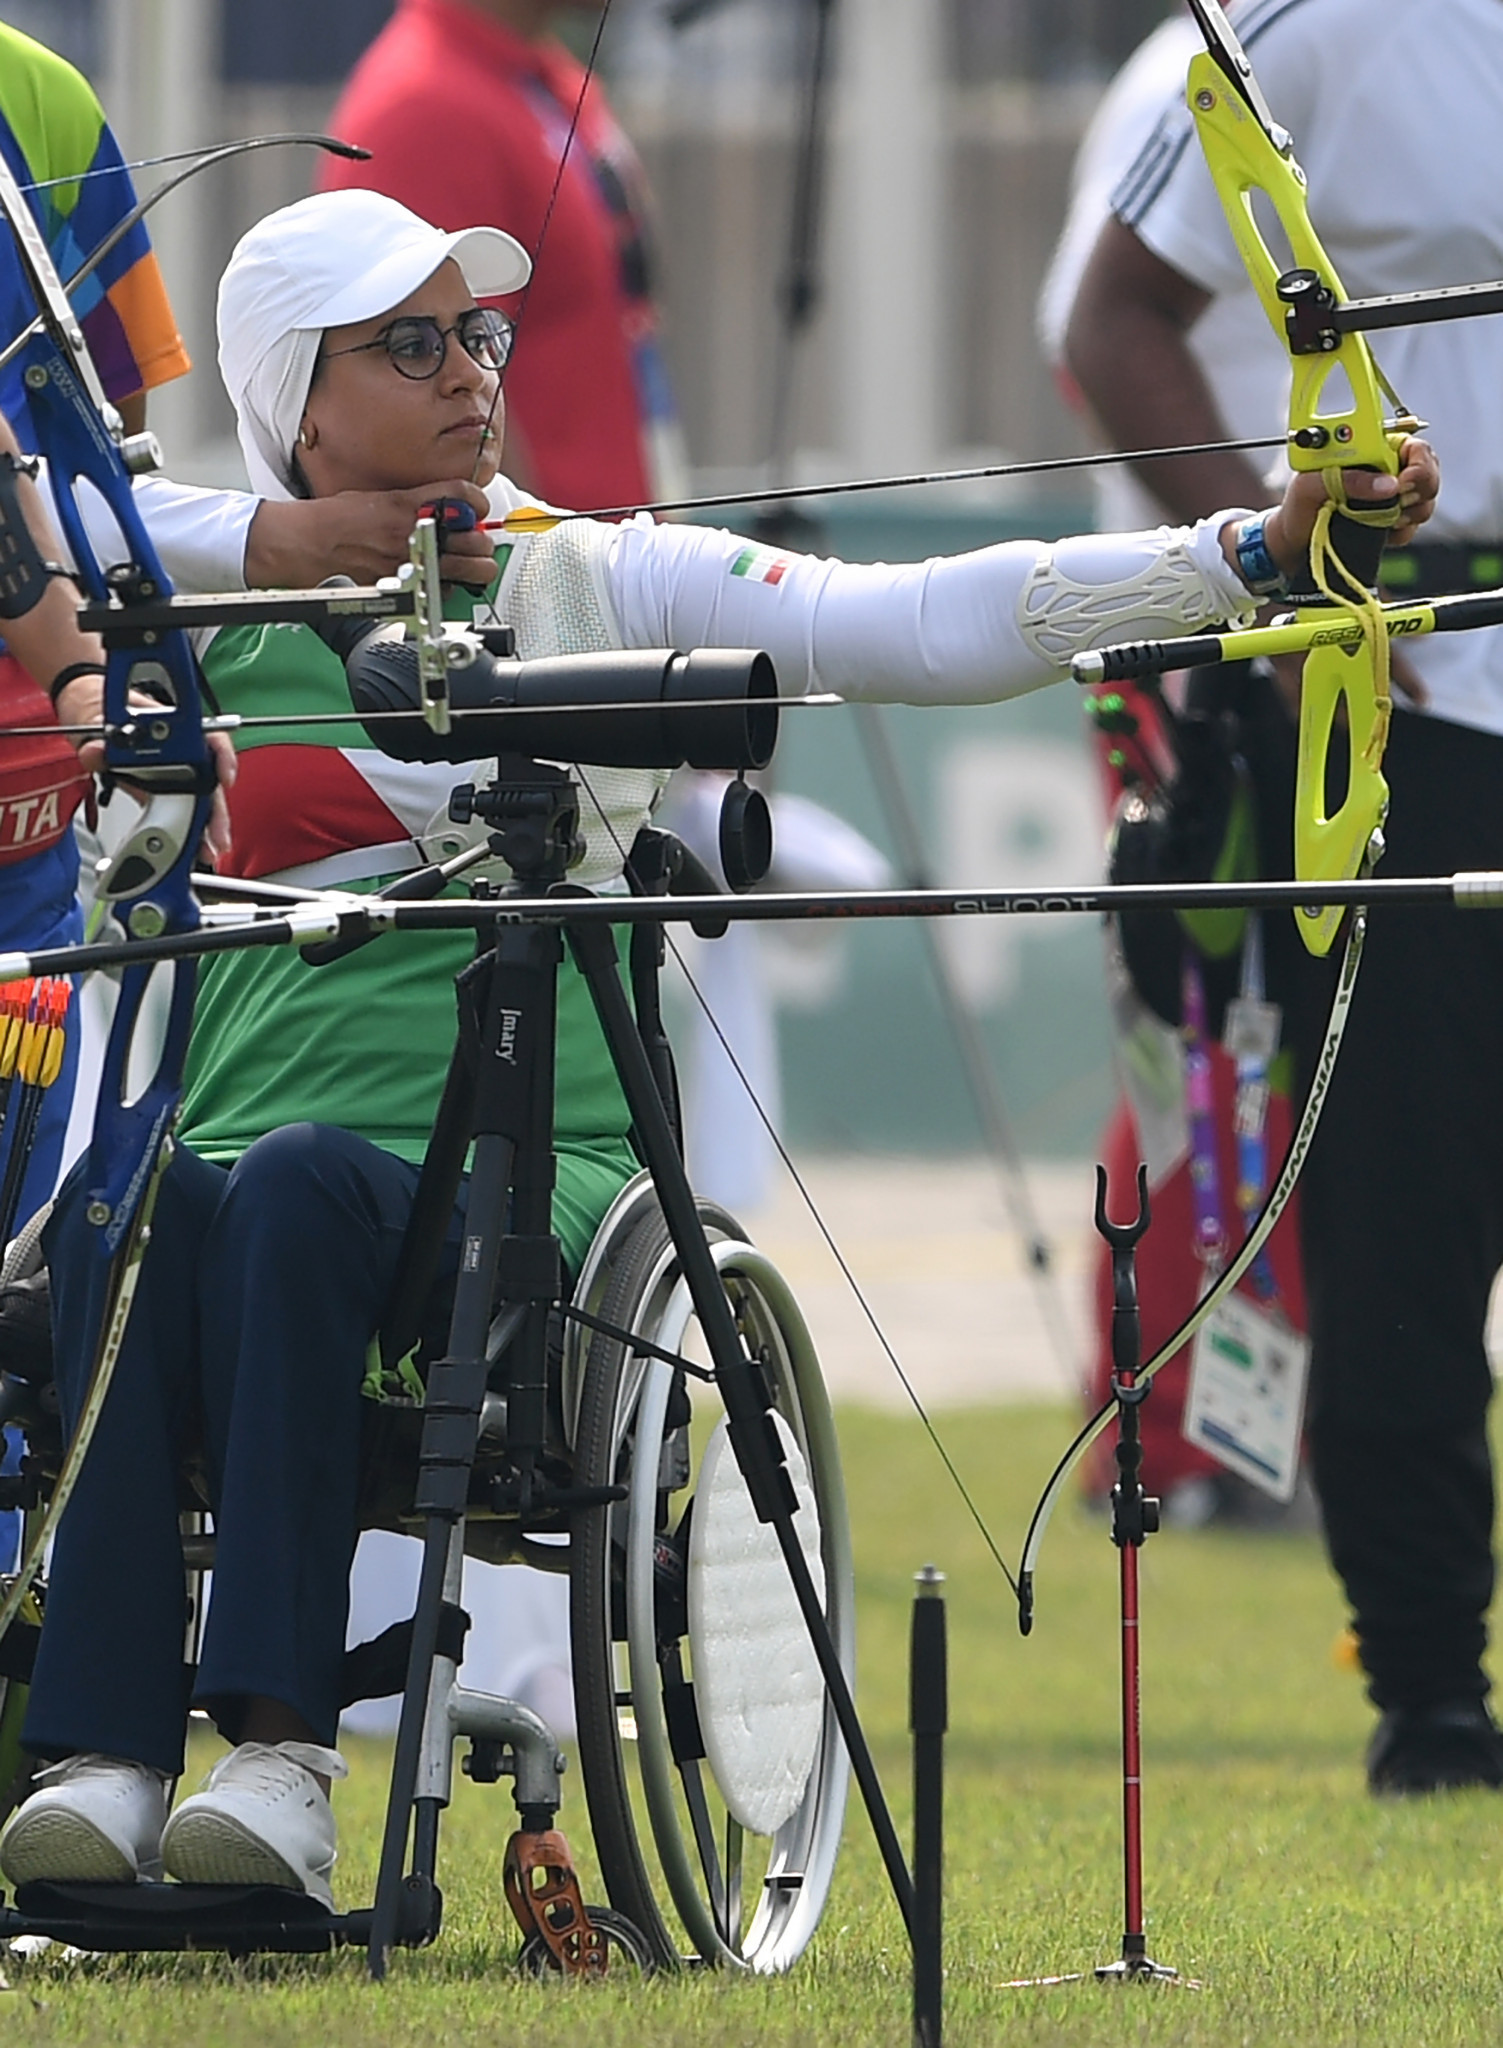 Iran's Zahara Nemati, who won her second Paralympic title at the Rio 2016 Games afer competing in the Olympics, may be contemplating another double in Tokyo as she prepares to compete in the Archery World Cup in Shanghai ©Getty Images